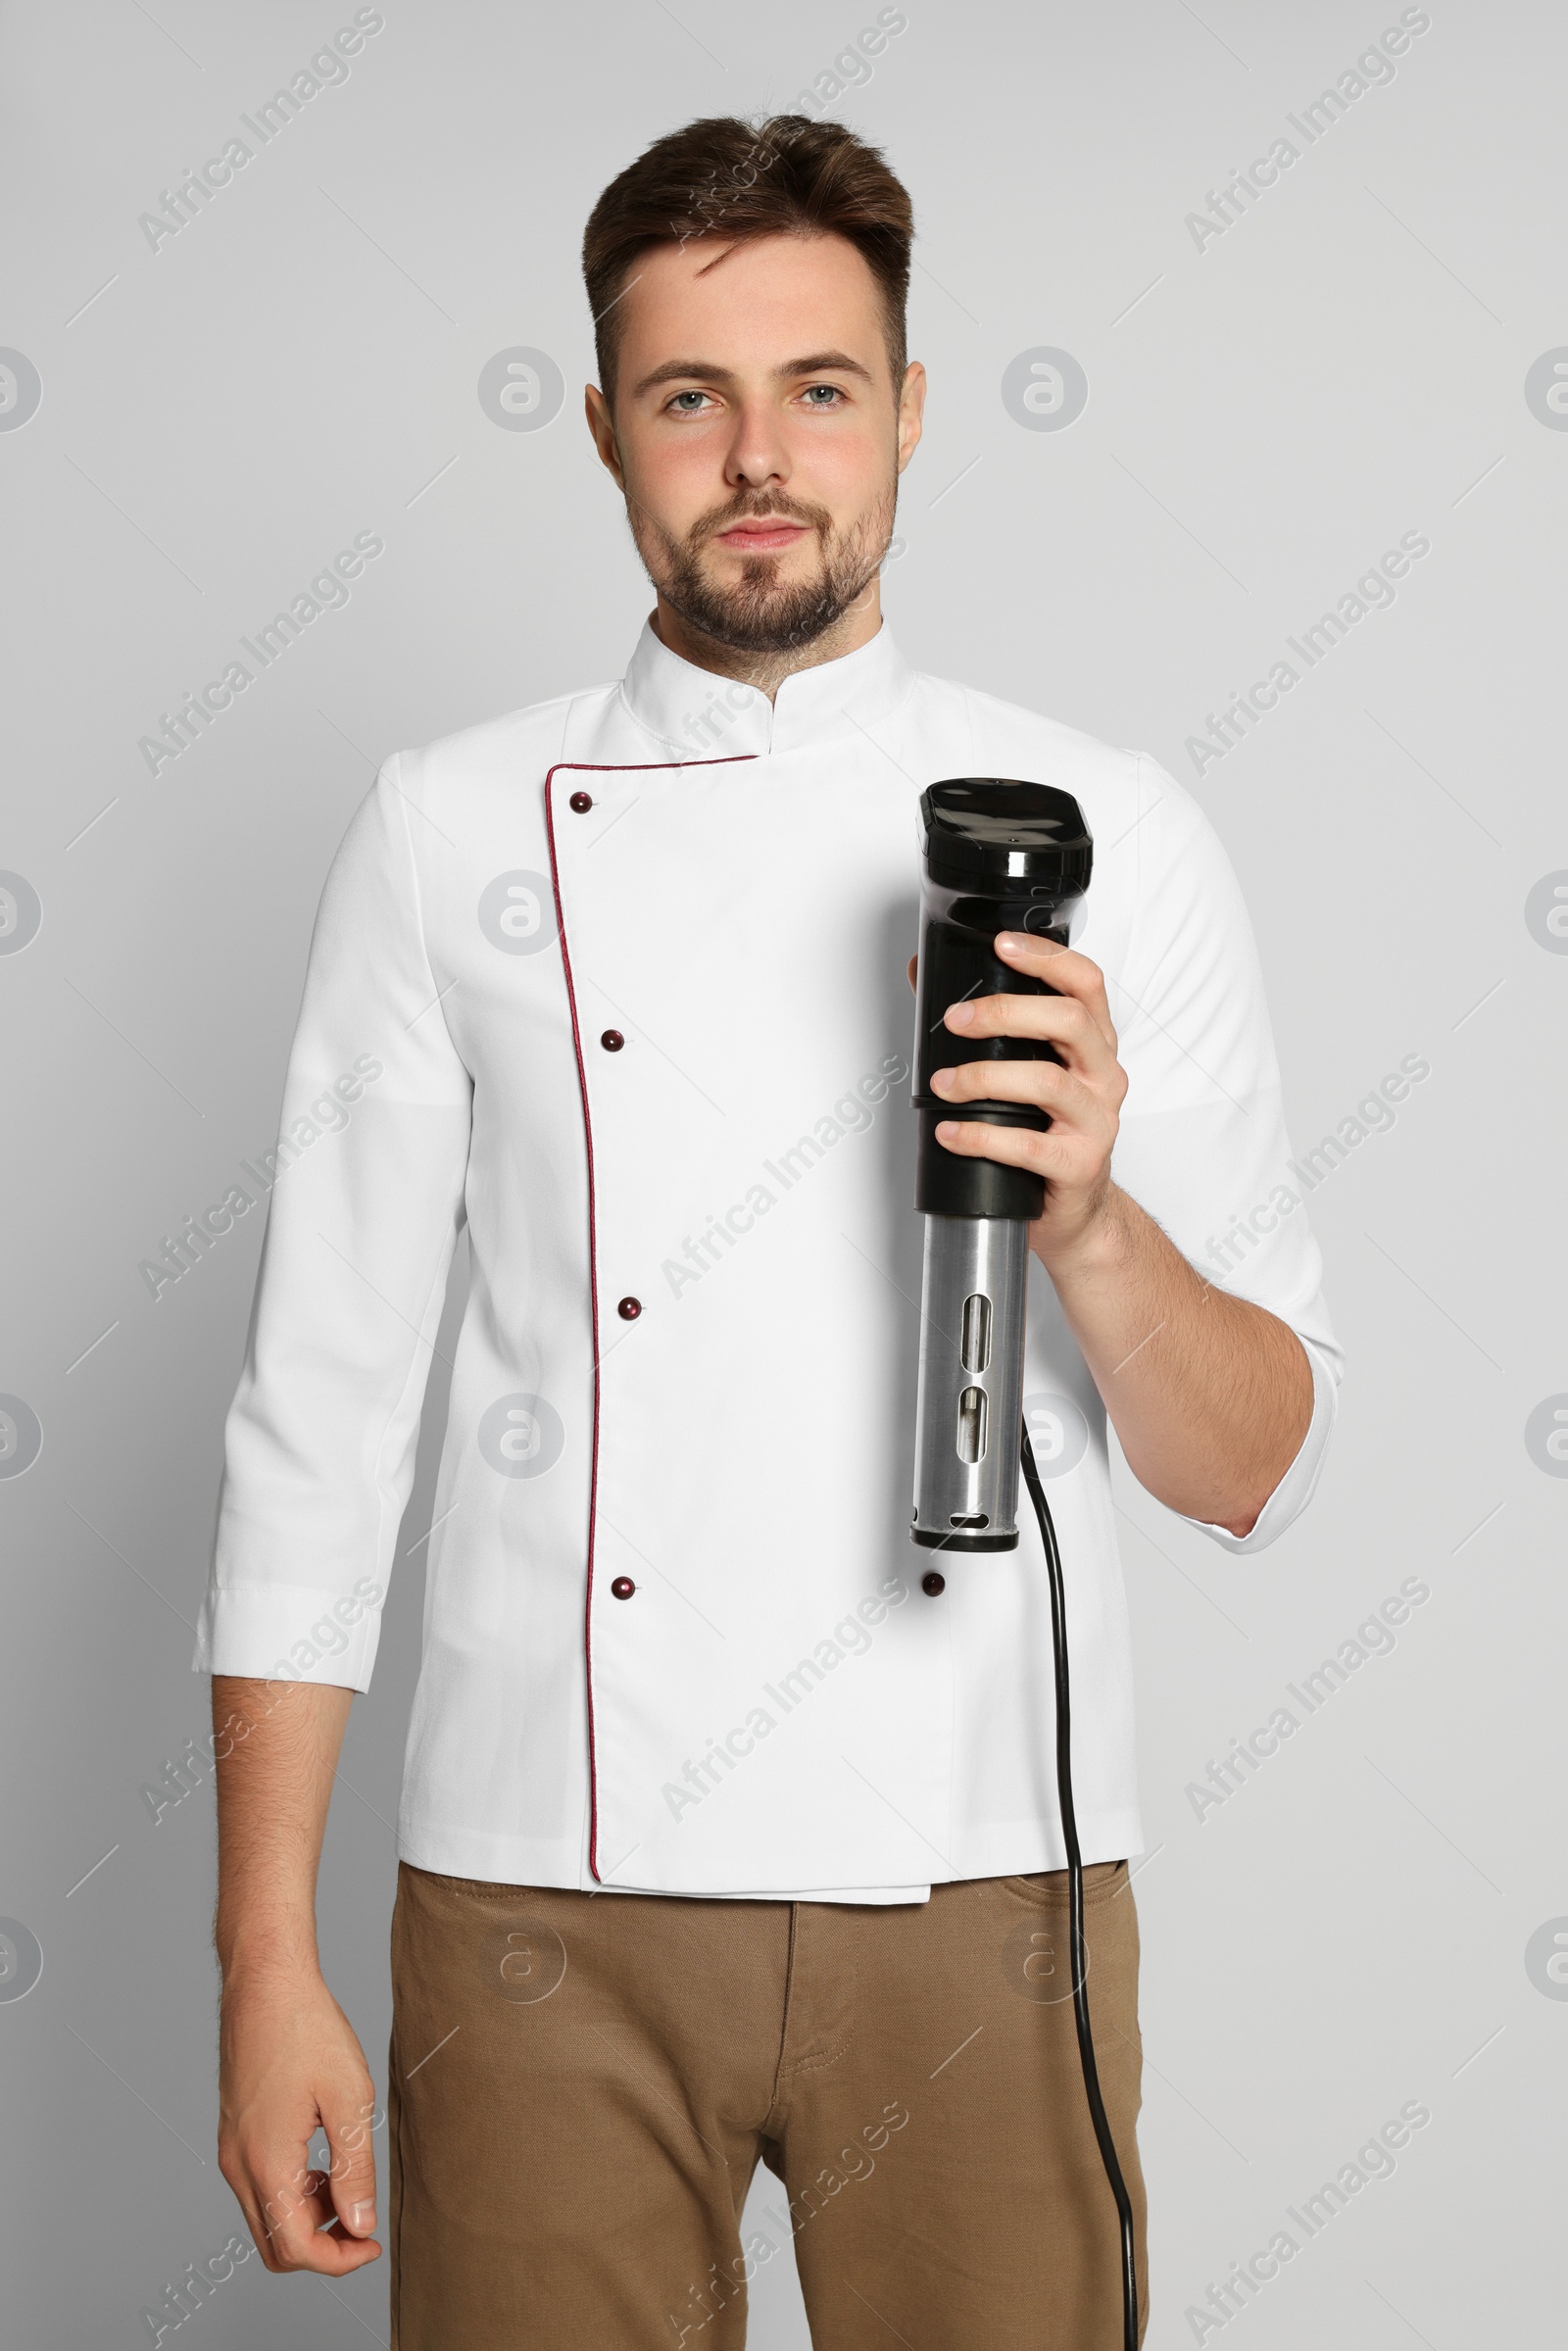 Photo of Chef holding sous vide cooker on beige background